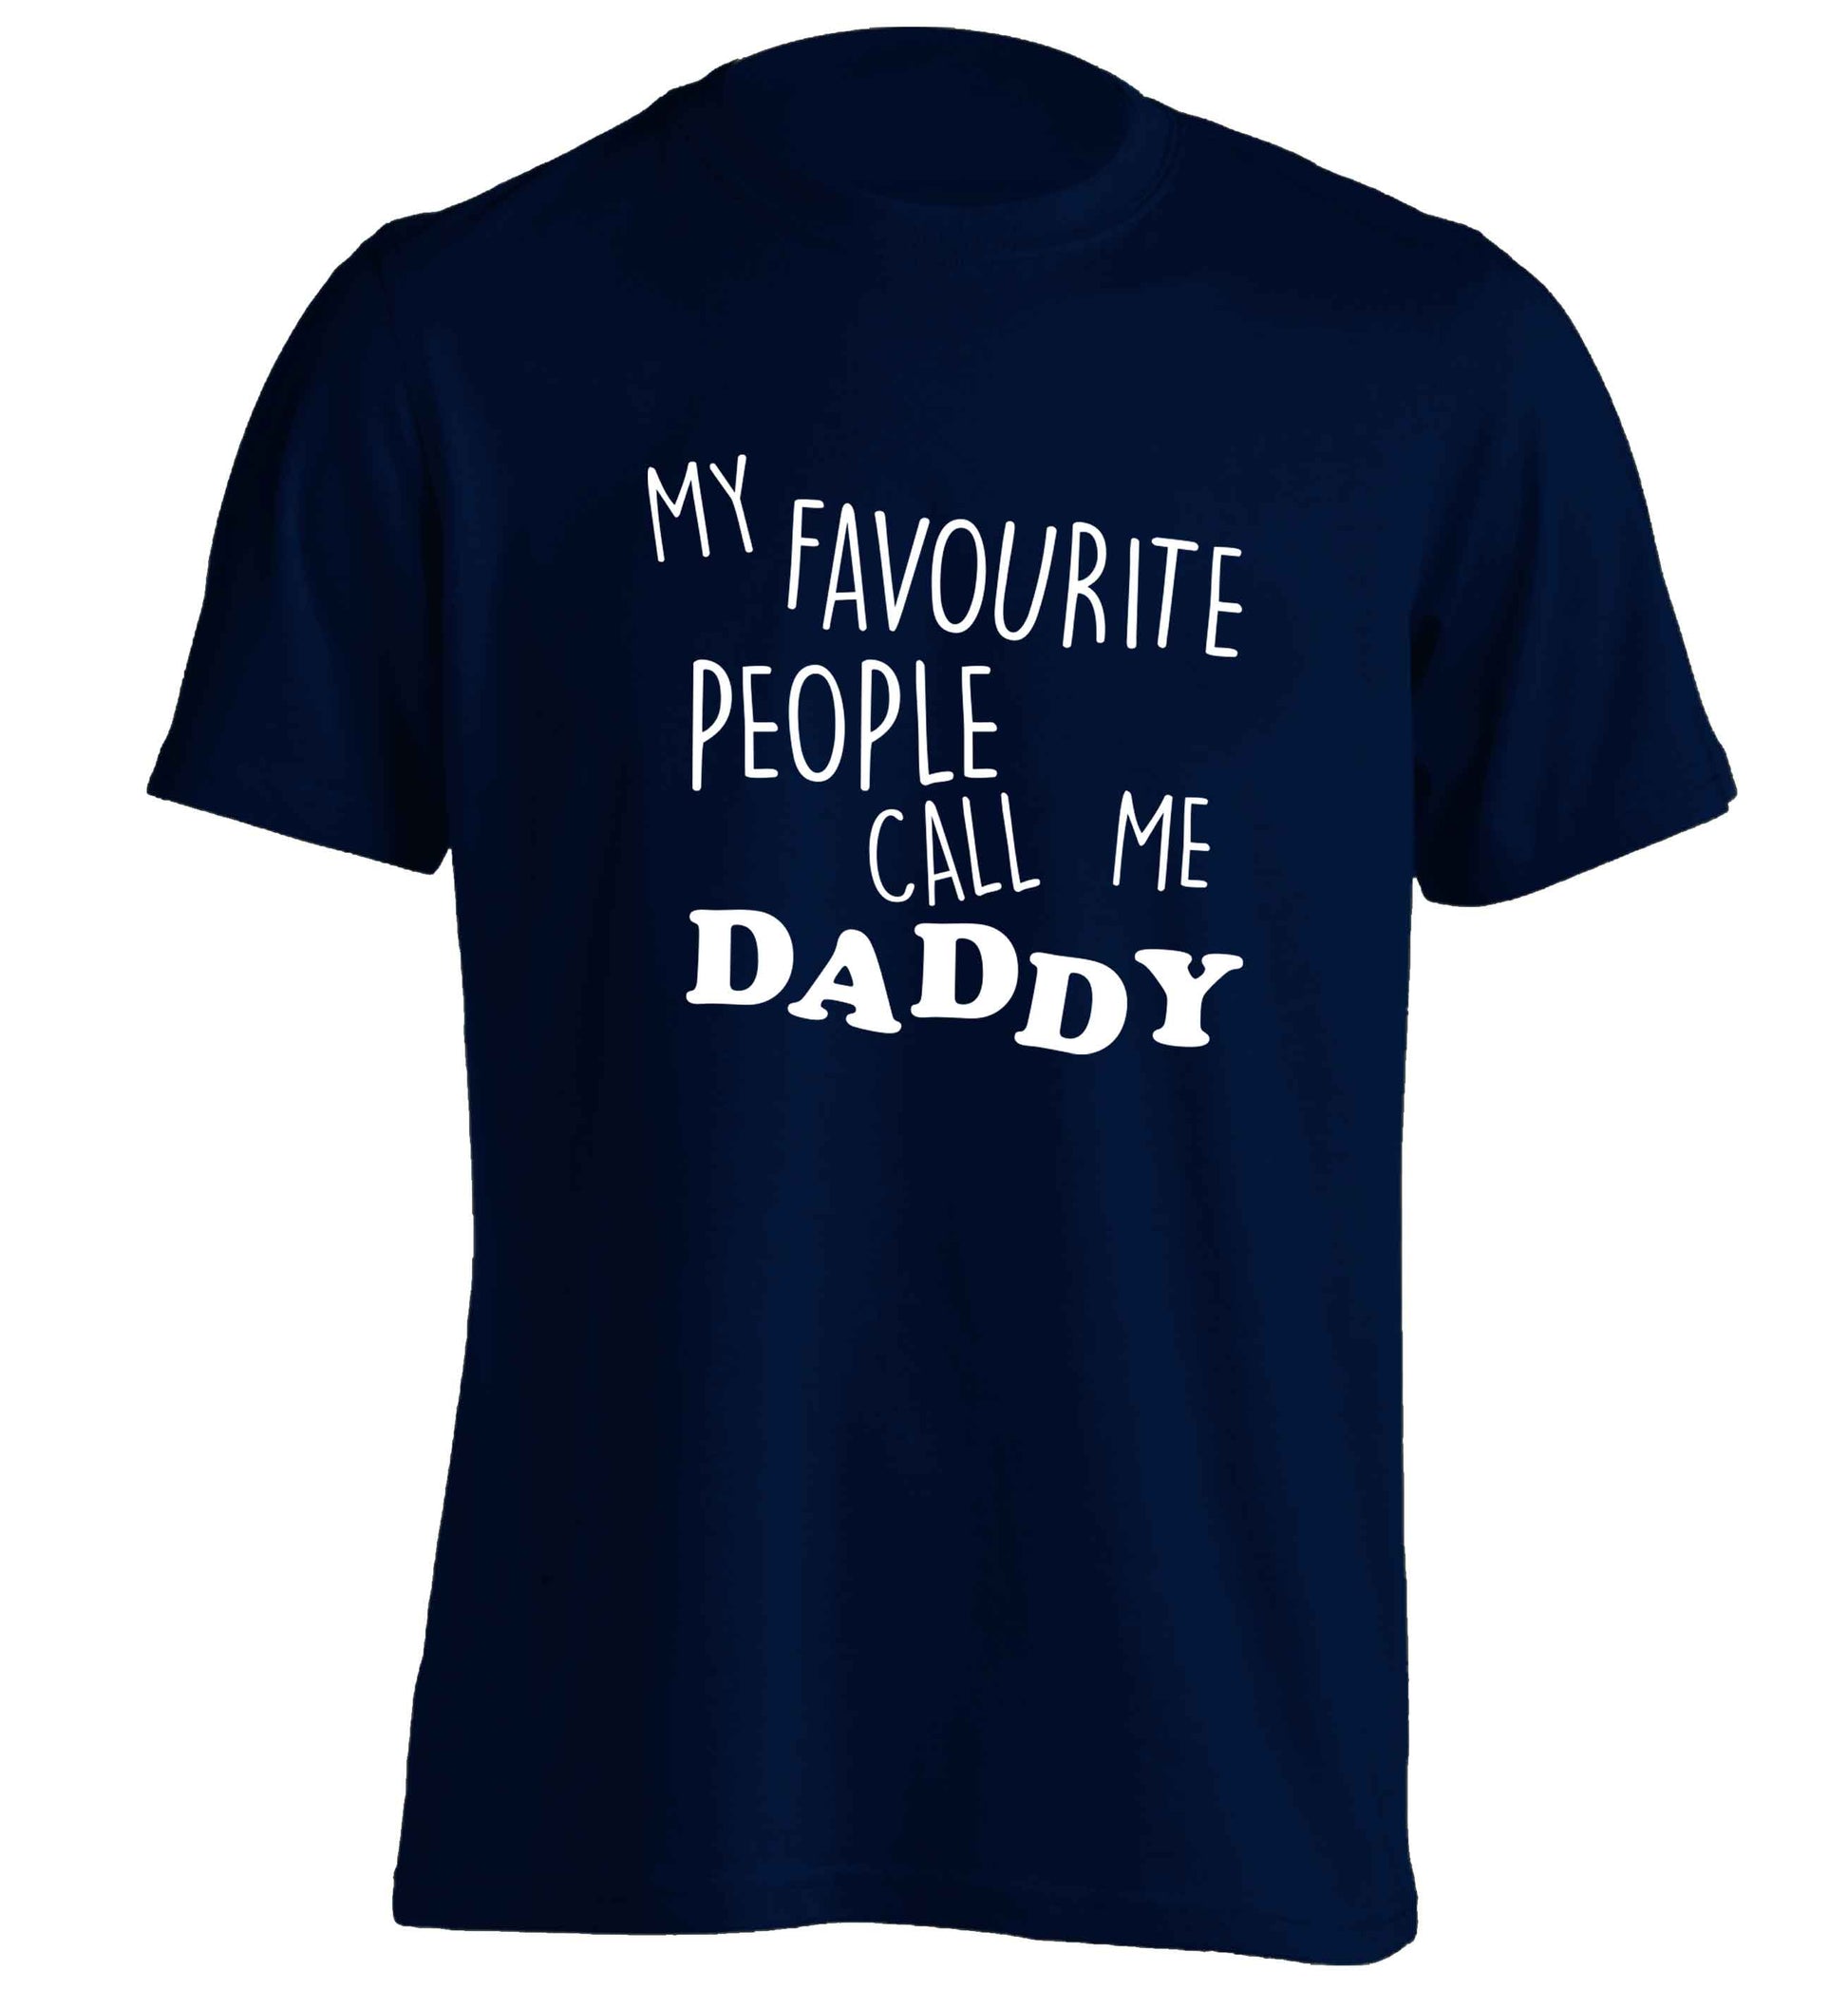 My favourite people call me daddy adults unisex navy Tshirt 2XL